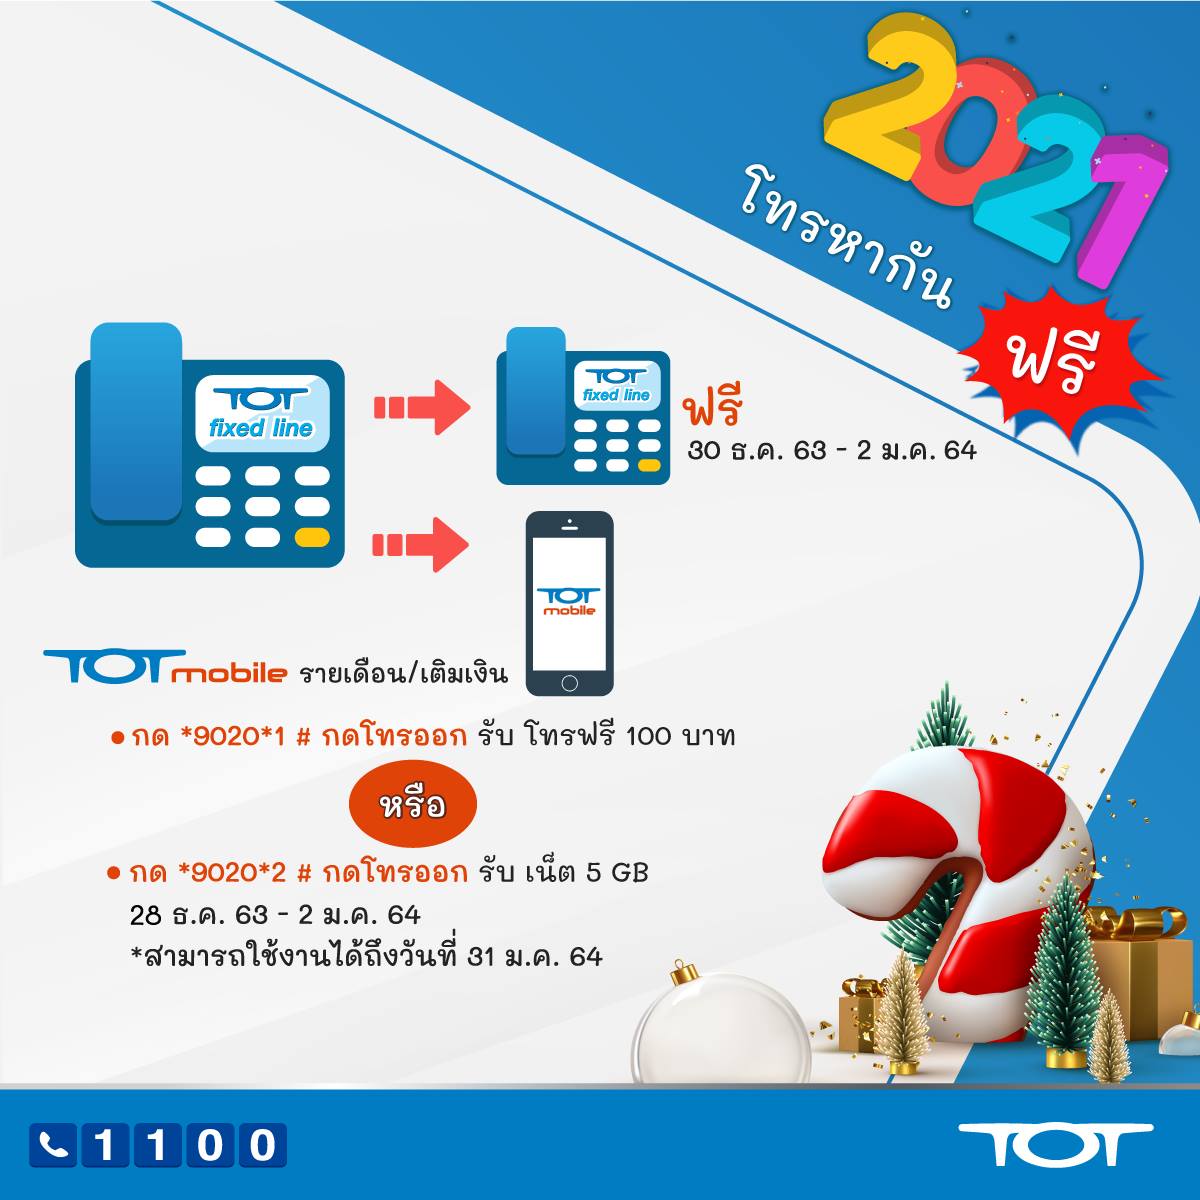 Content_News_Happy New Year 2020 by TOT_01